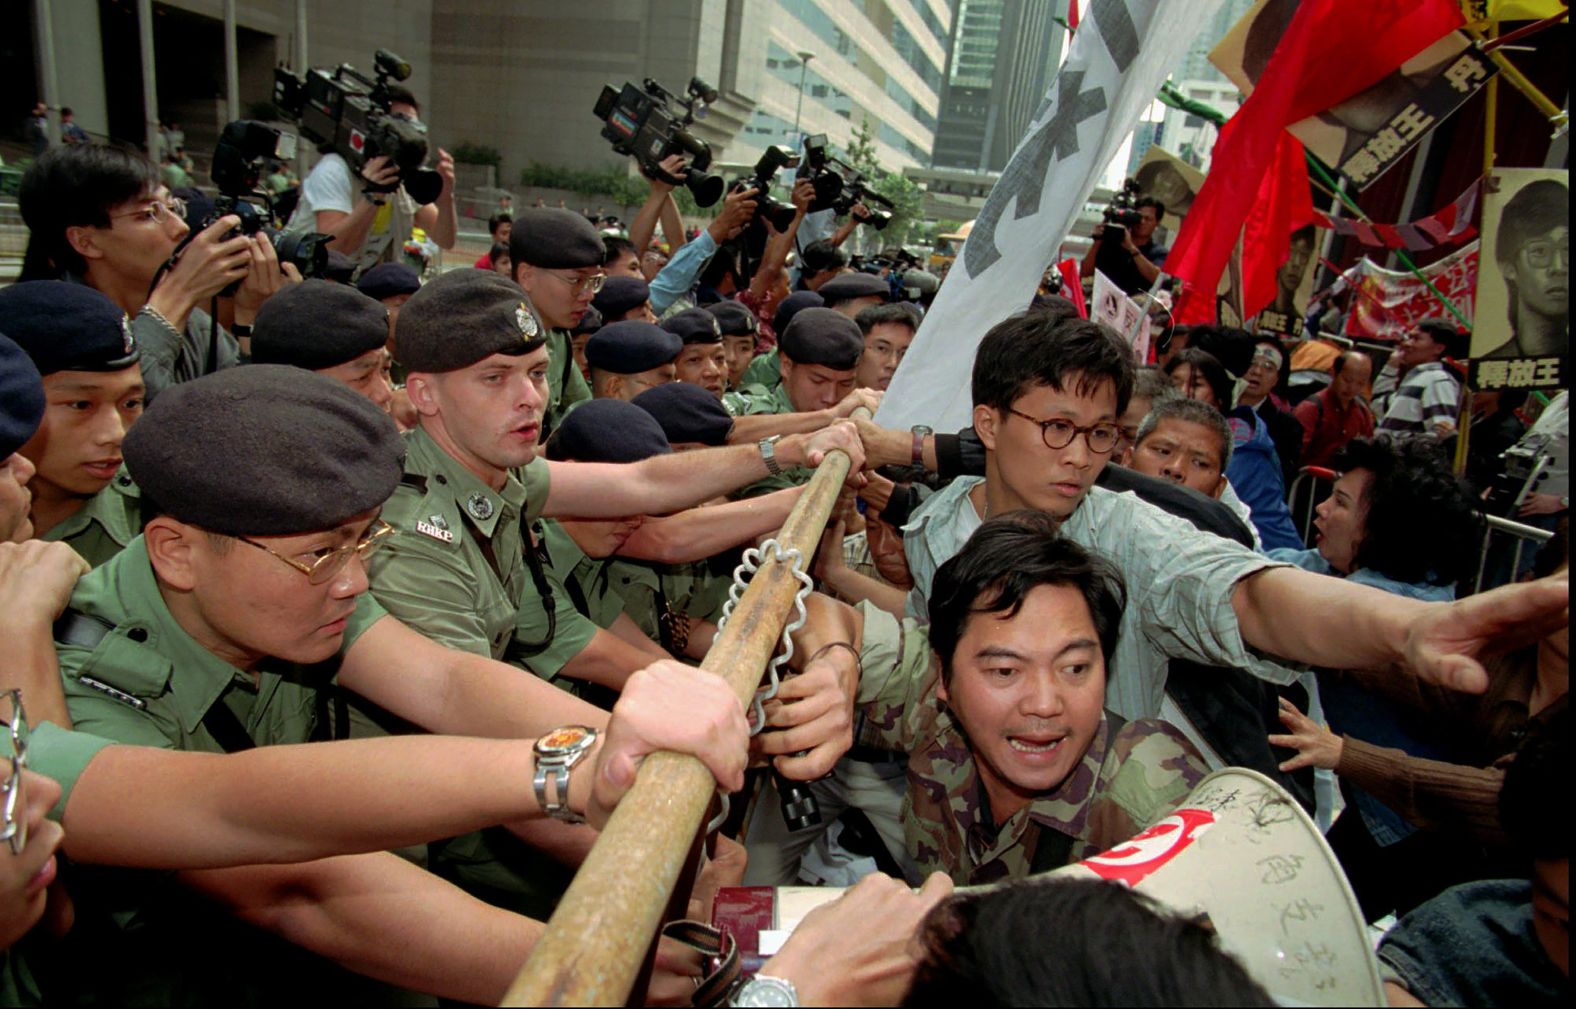 Pro-democracy activists scuffle with police officers outside the Hong Kong Convention Center as they protest the visit of Chinese Foreign Minister Qian Qichen on November 15, 1996. The protesters claimed that Qian was the harbinger of "illegal" changes to Hong Kong's political system. 